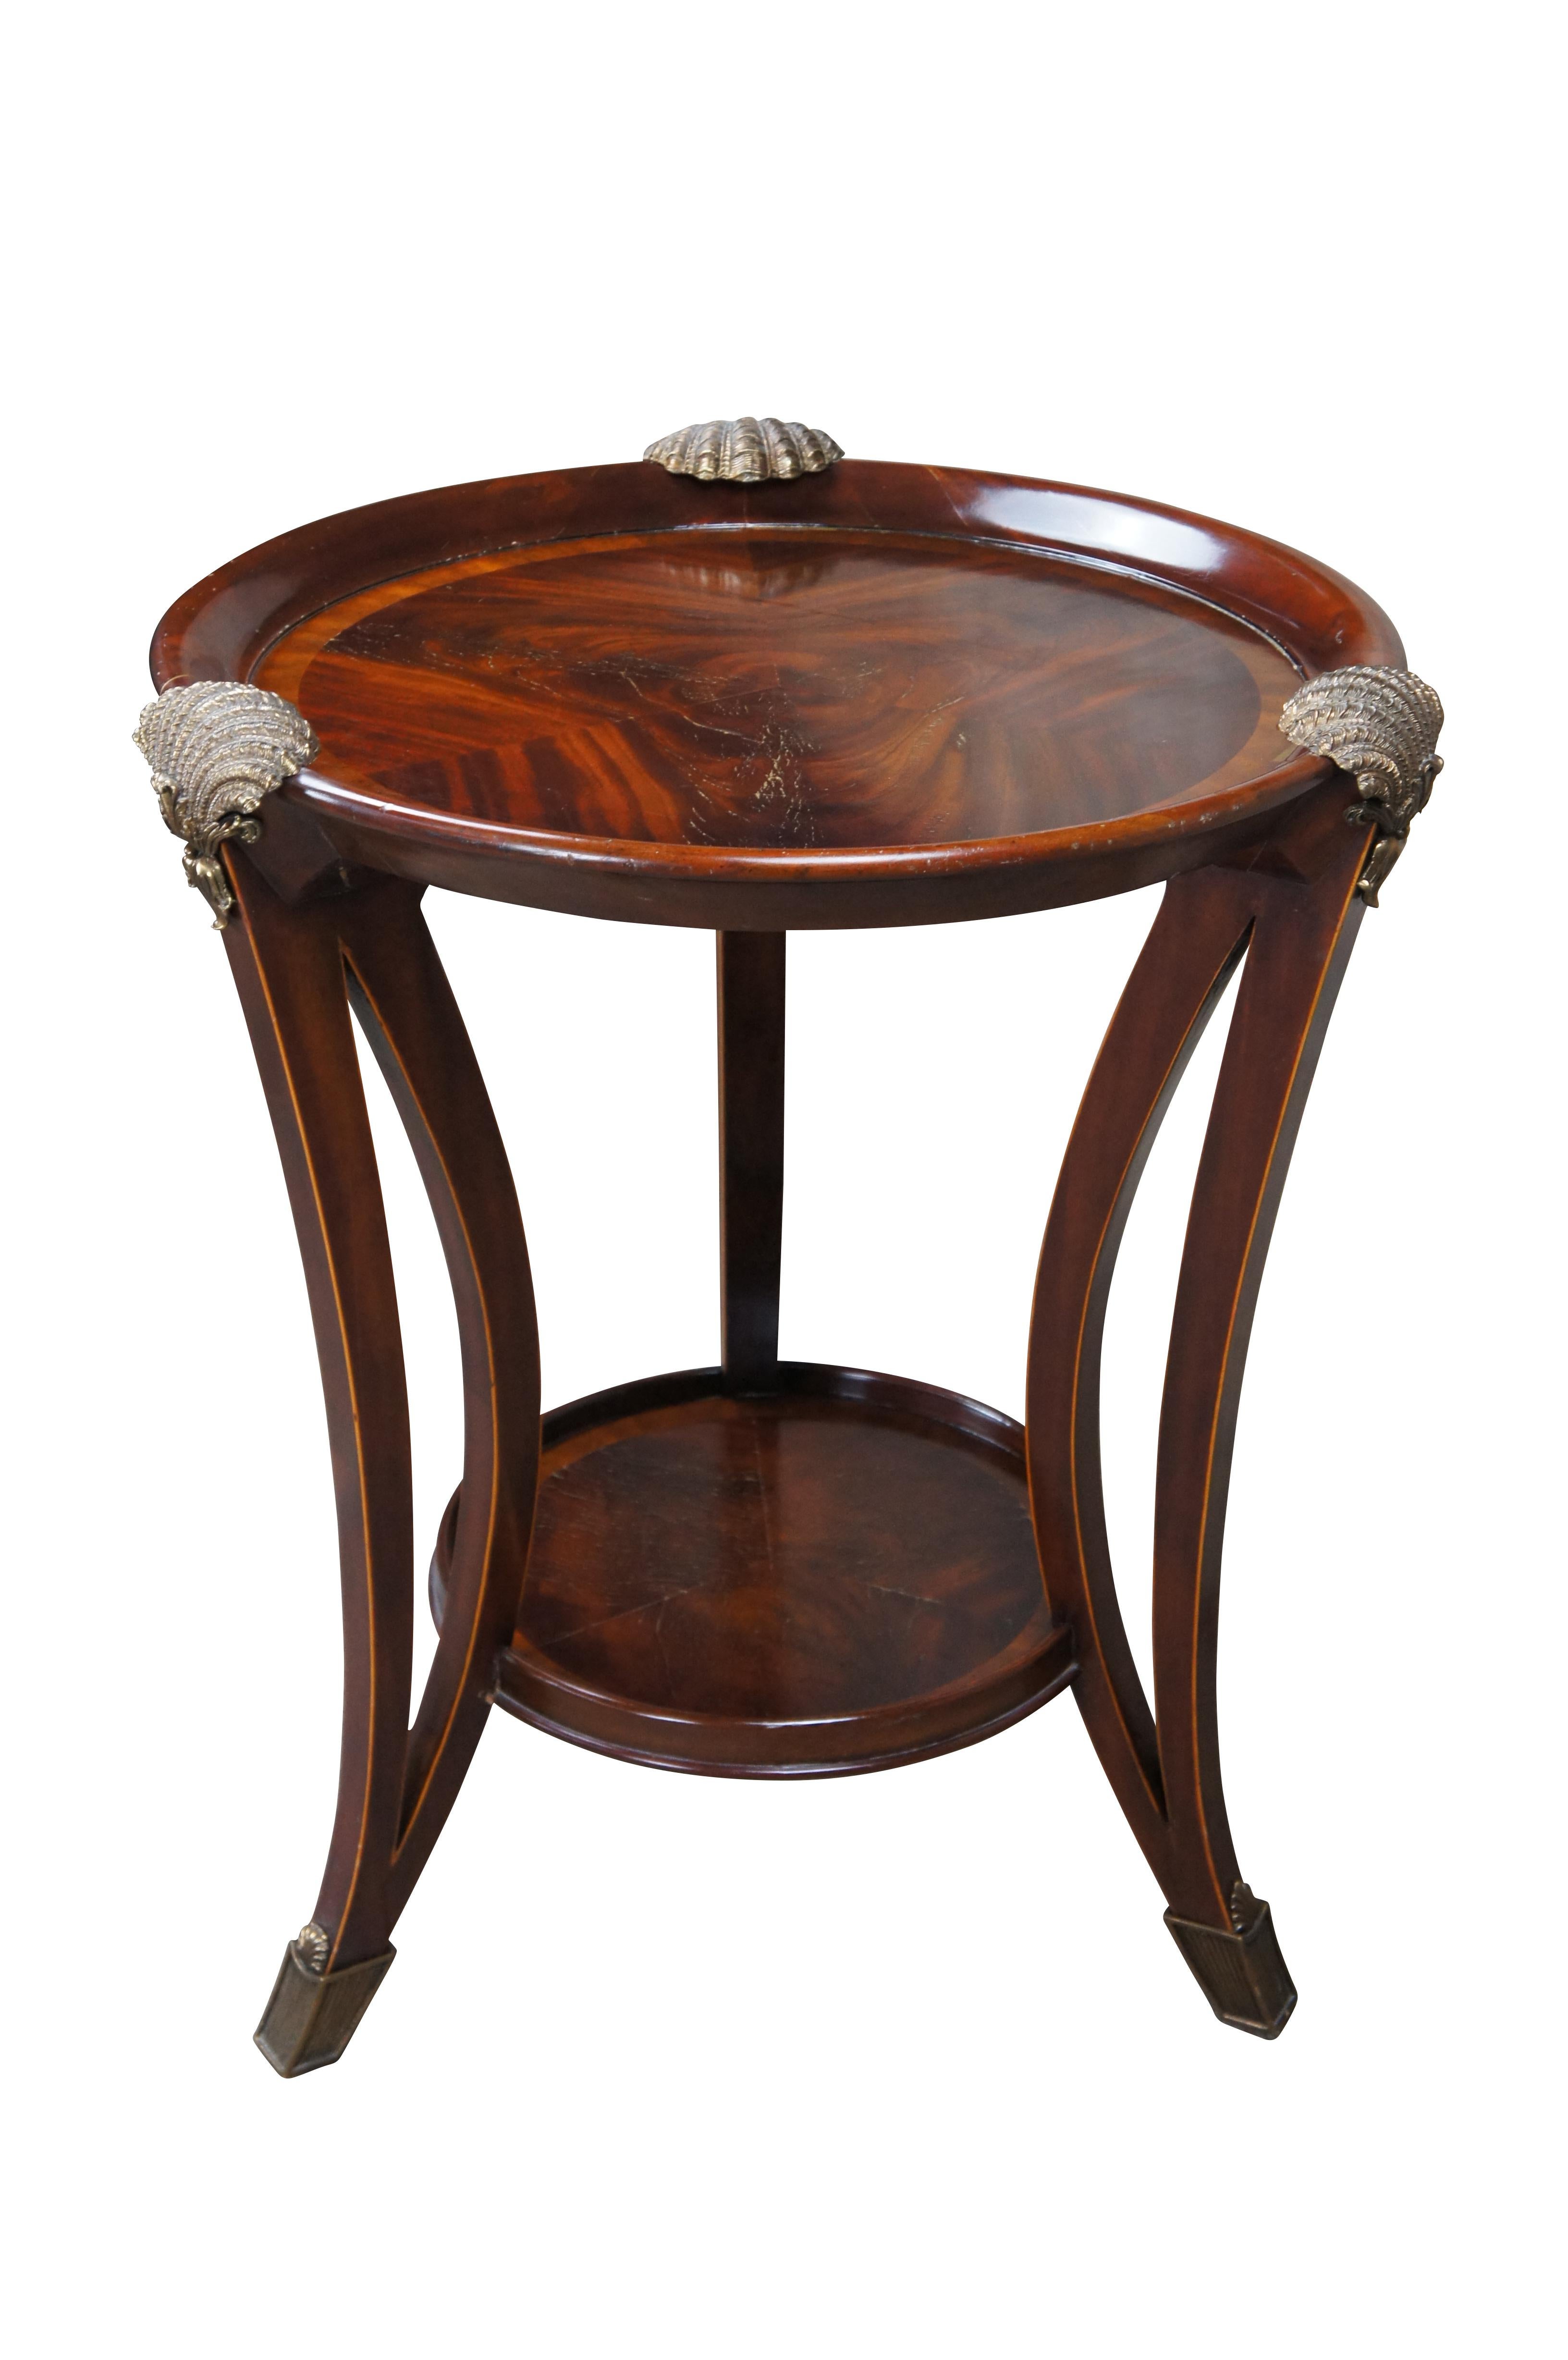 Maitland Smith Sheraton Style Flame Mahogany Round Scalloped Ormolu Table Stand In Good Condition For Sale In Dayton, OH